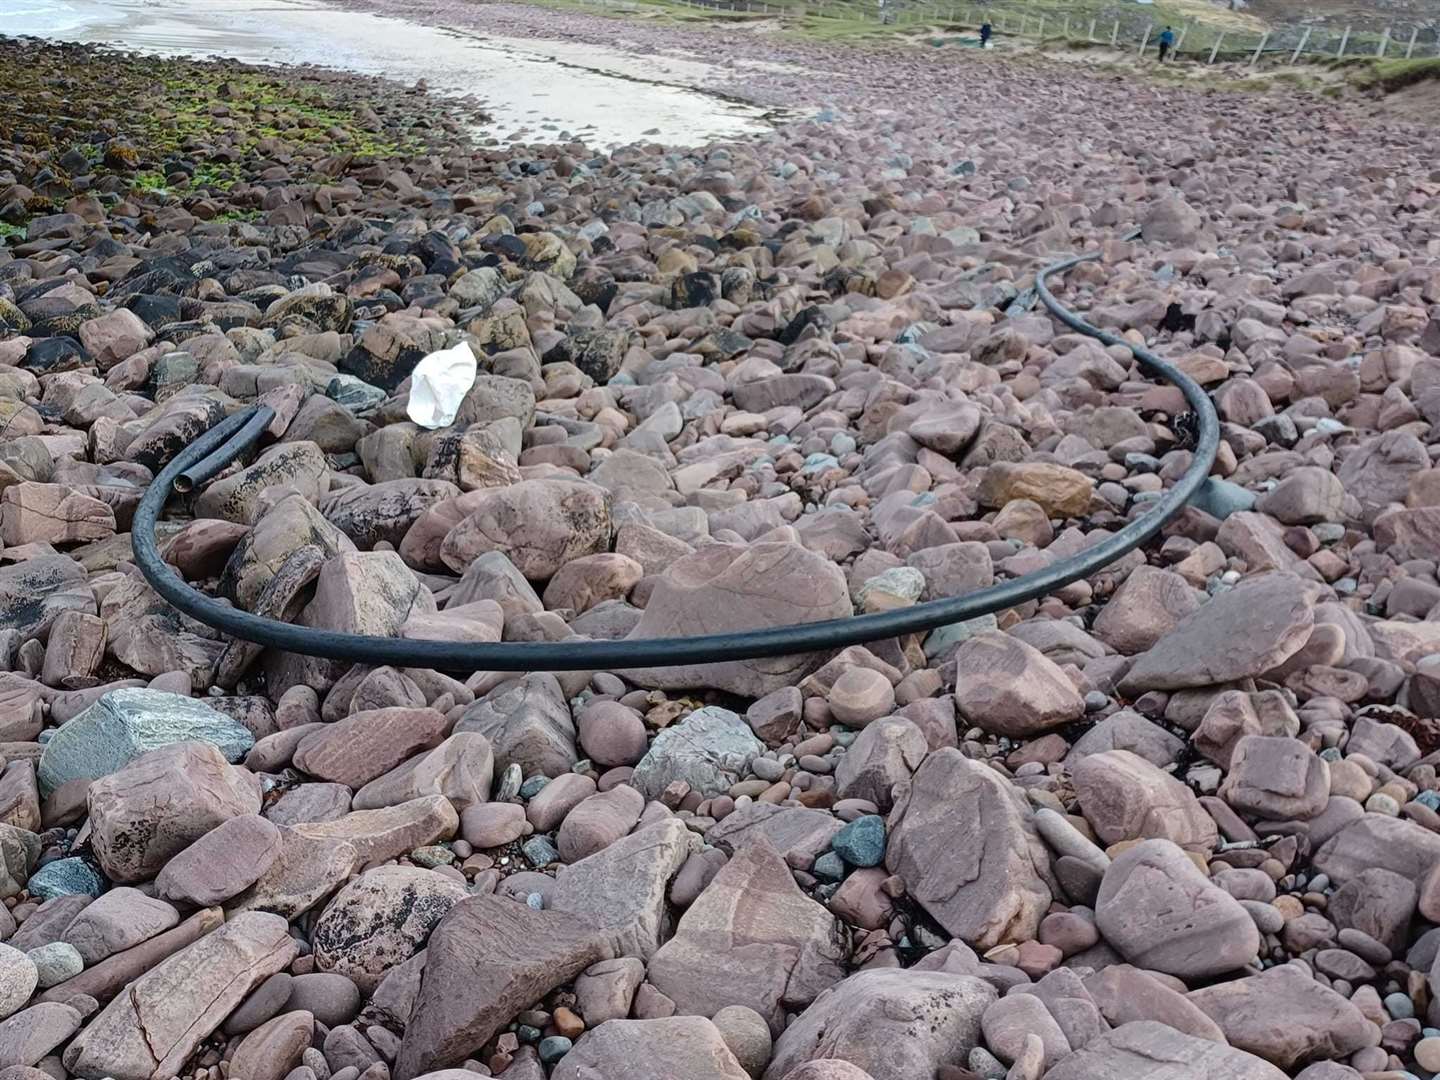 A fish farm feed pipe lying on the shore.